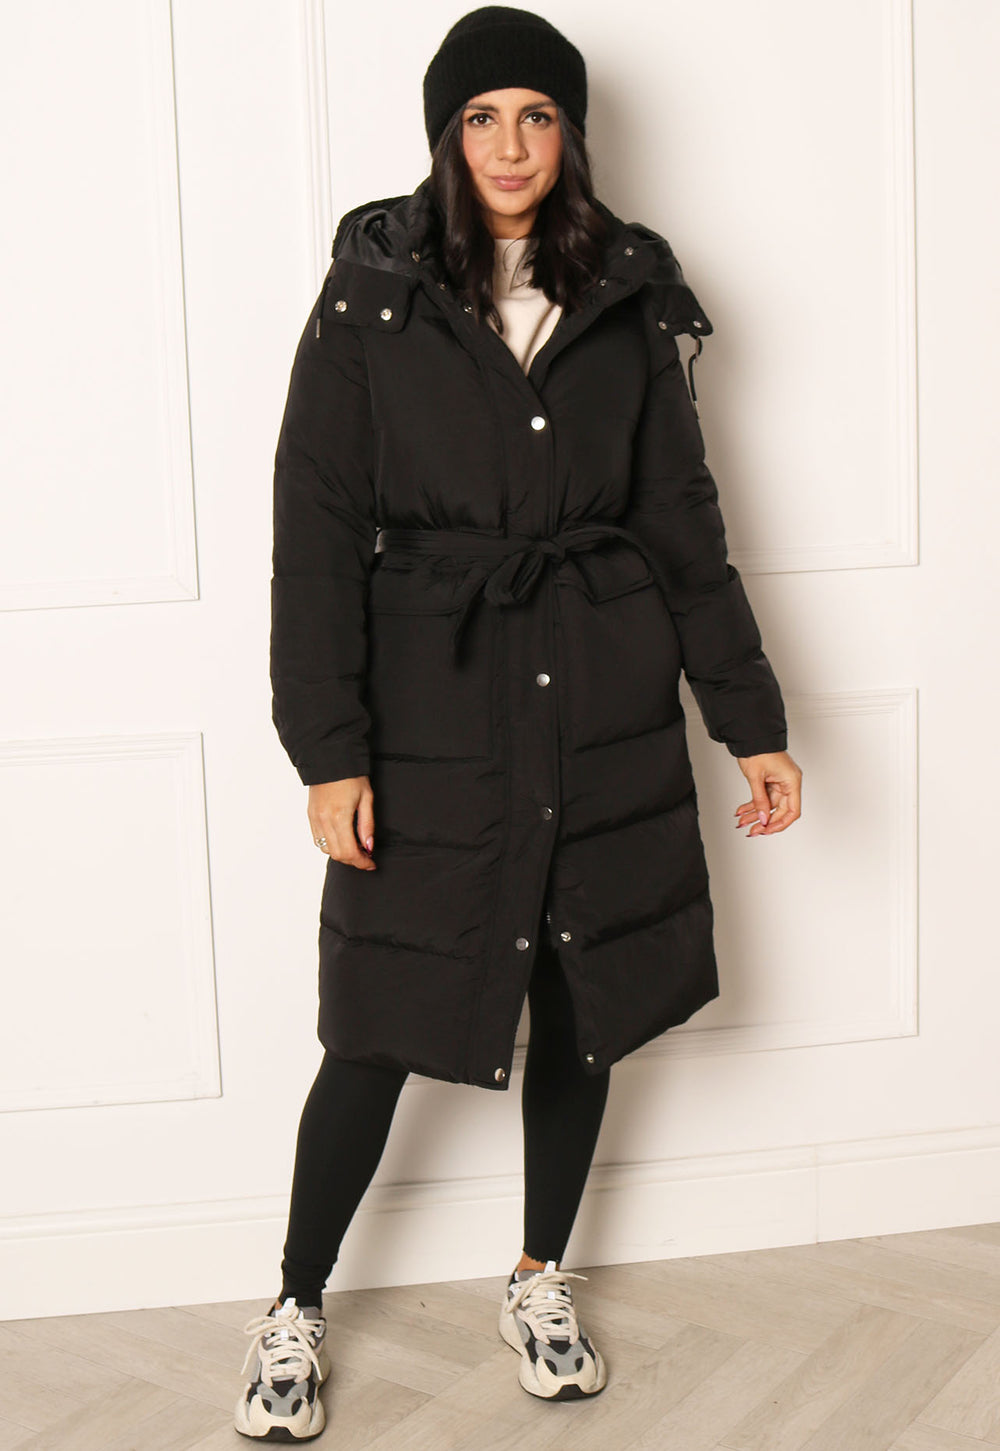 VERO MODA Signe Premium Longline Down Midi Puffer Coat with Belt & Removable Hood in Black - One Nation Clothing